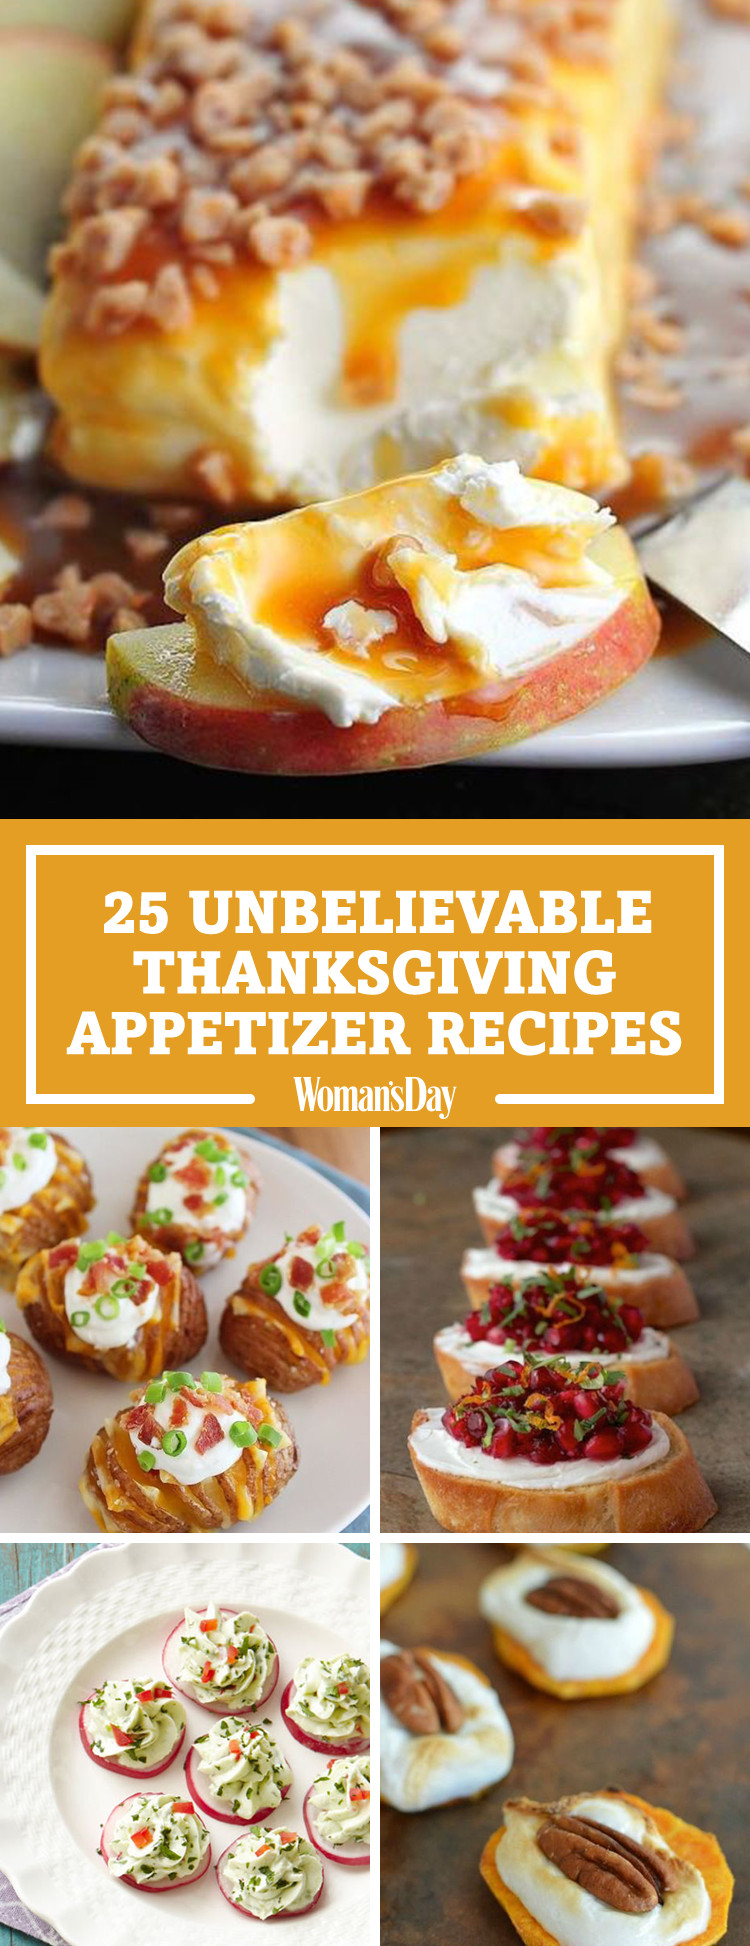 Easy Appetizers For Thanksgiving
 34 Easy Thanksgiving Appetizers Best Recipes for